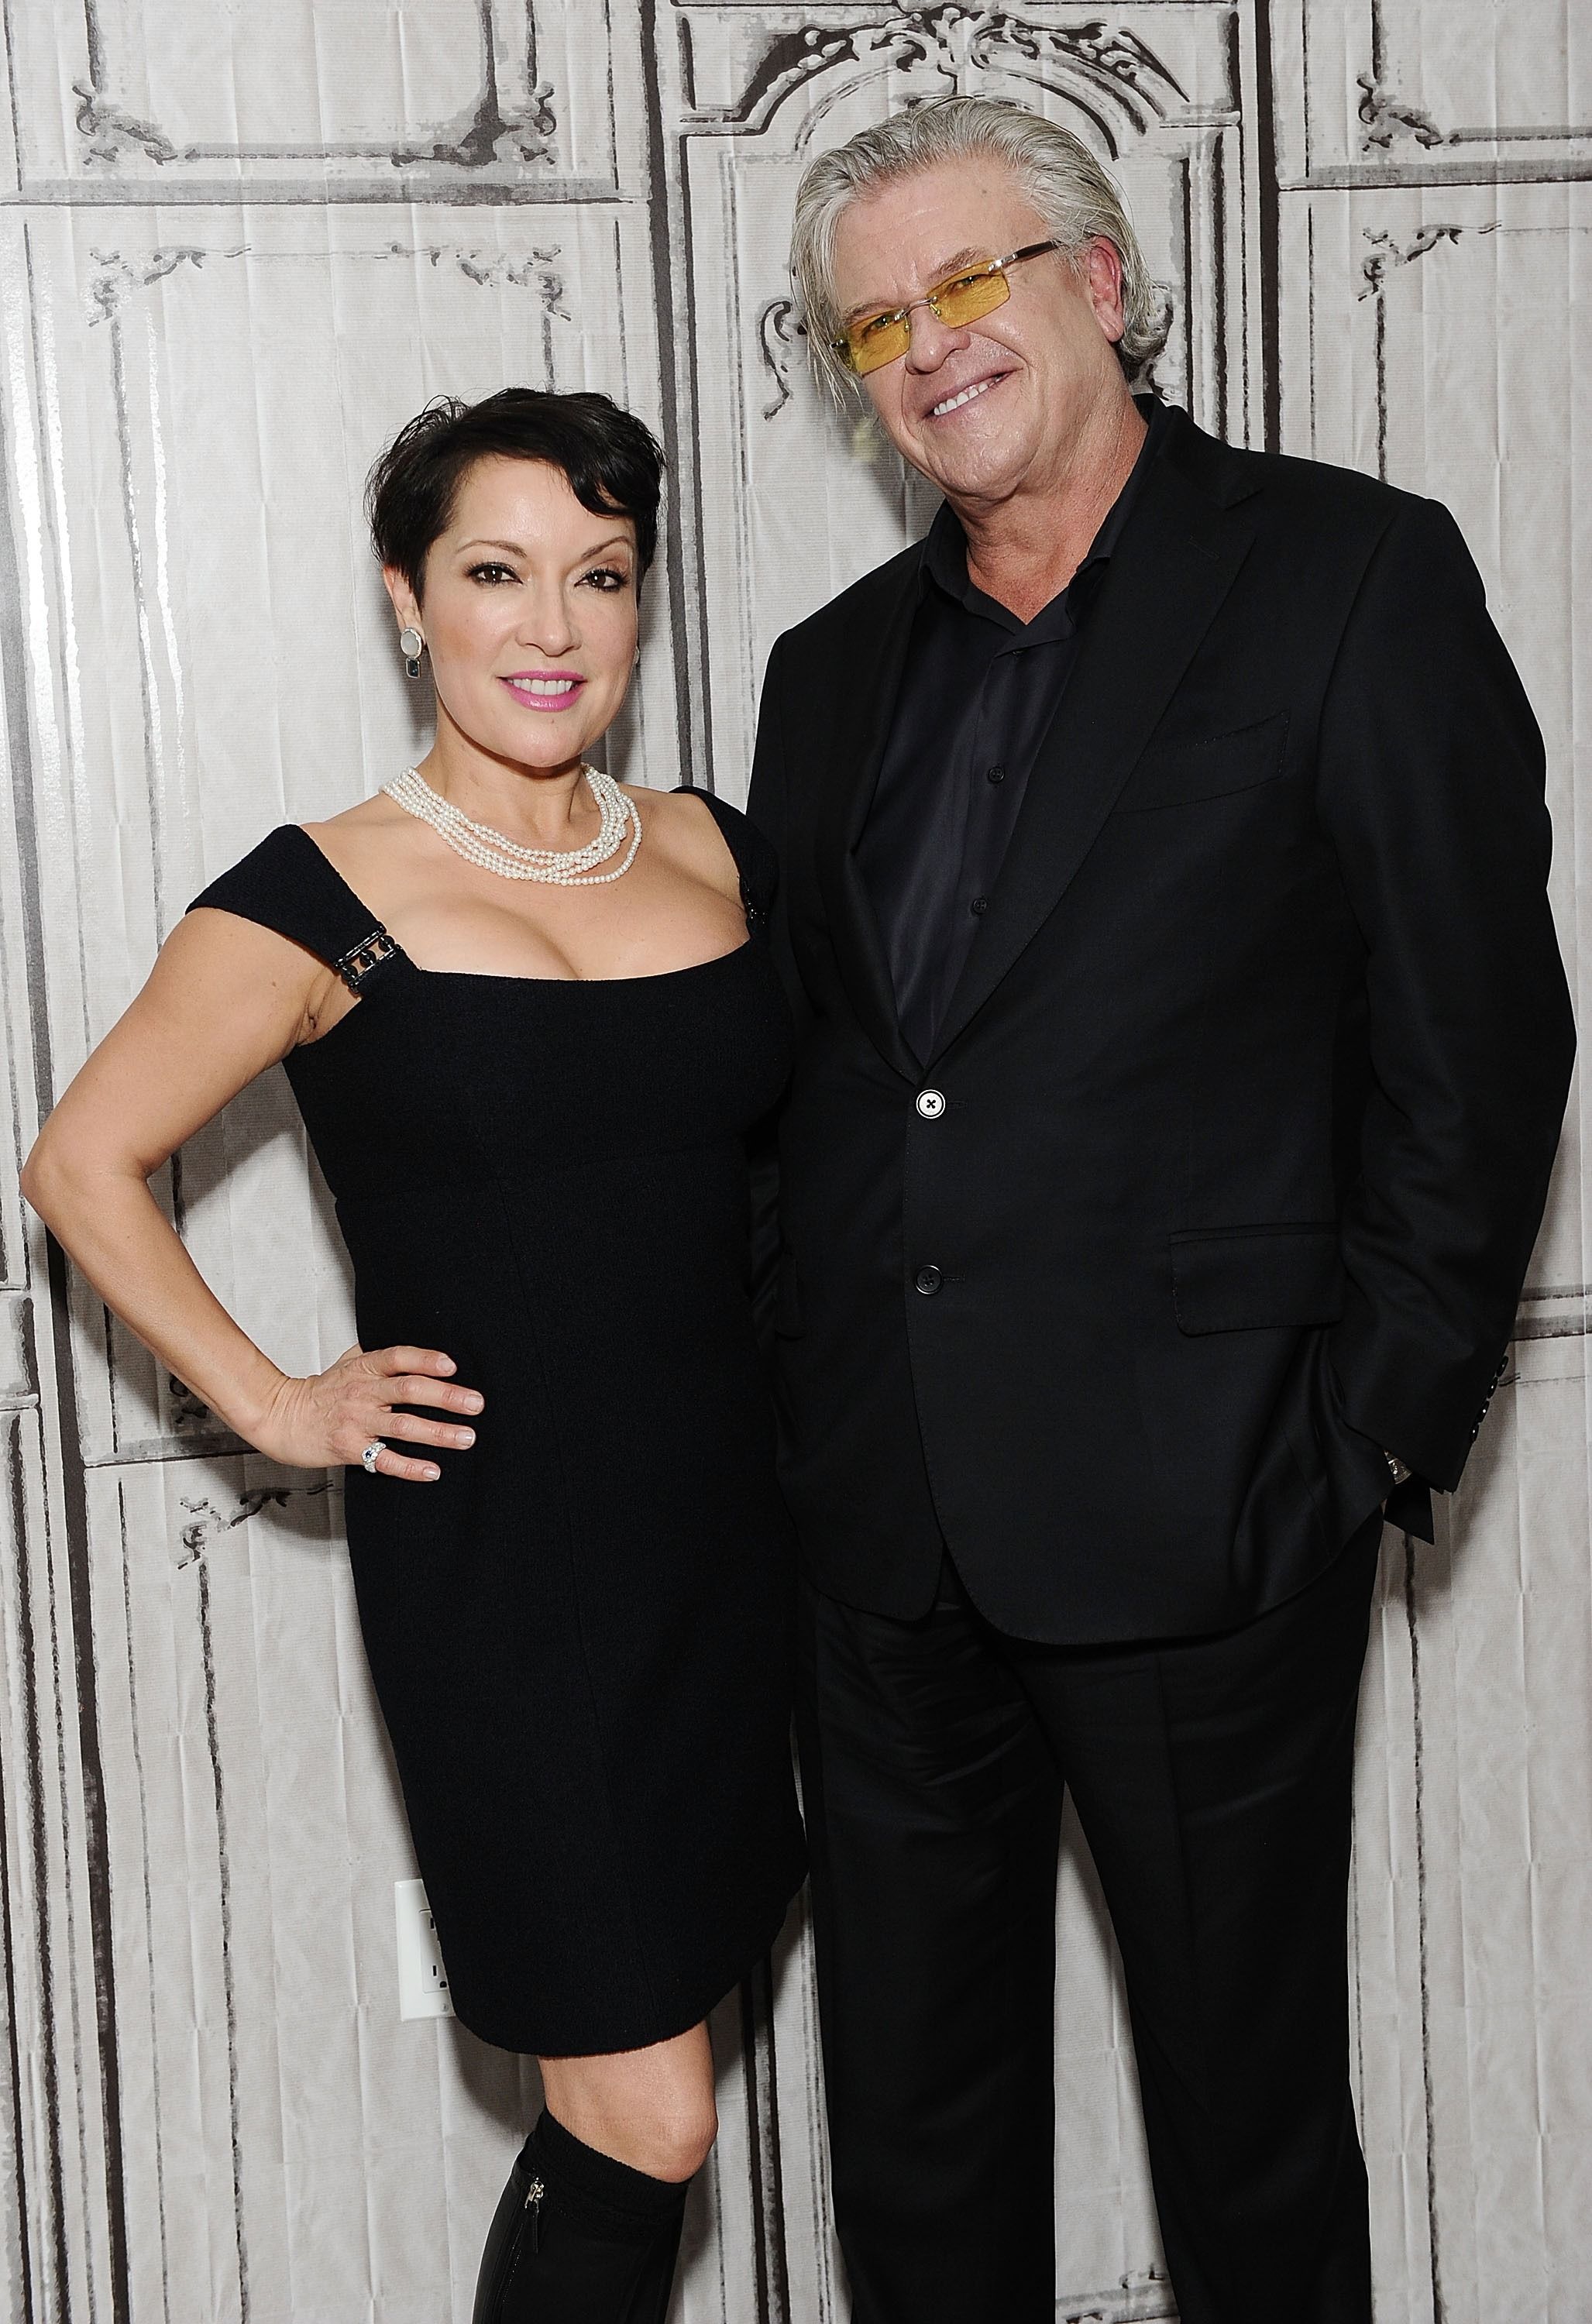 Ron White and Margo Rey attend AOL Build at AOL Studios on November 11, 2015, in New York City. | Source: Getty Images